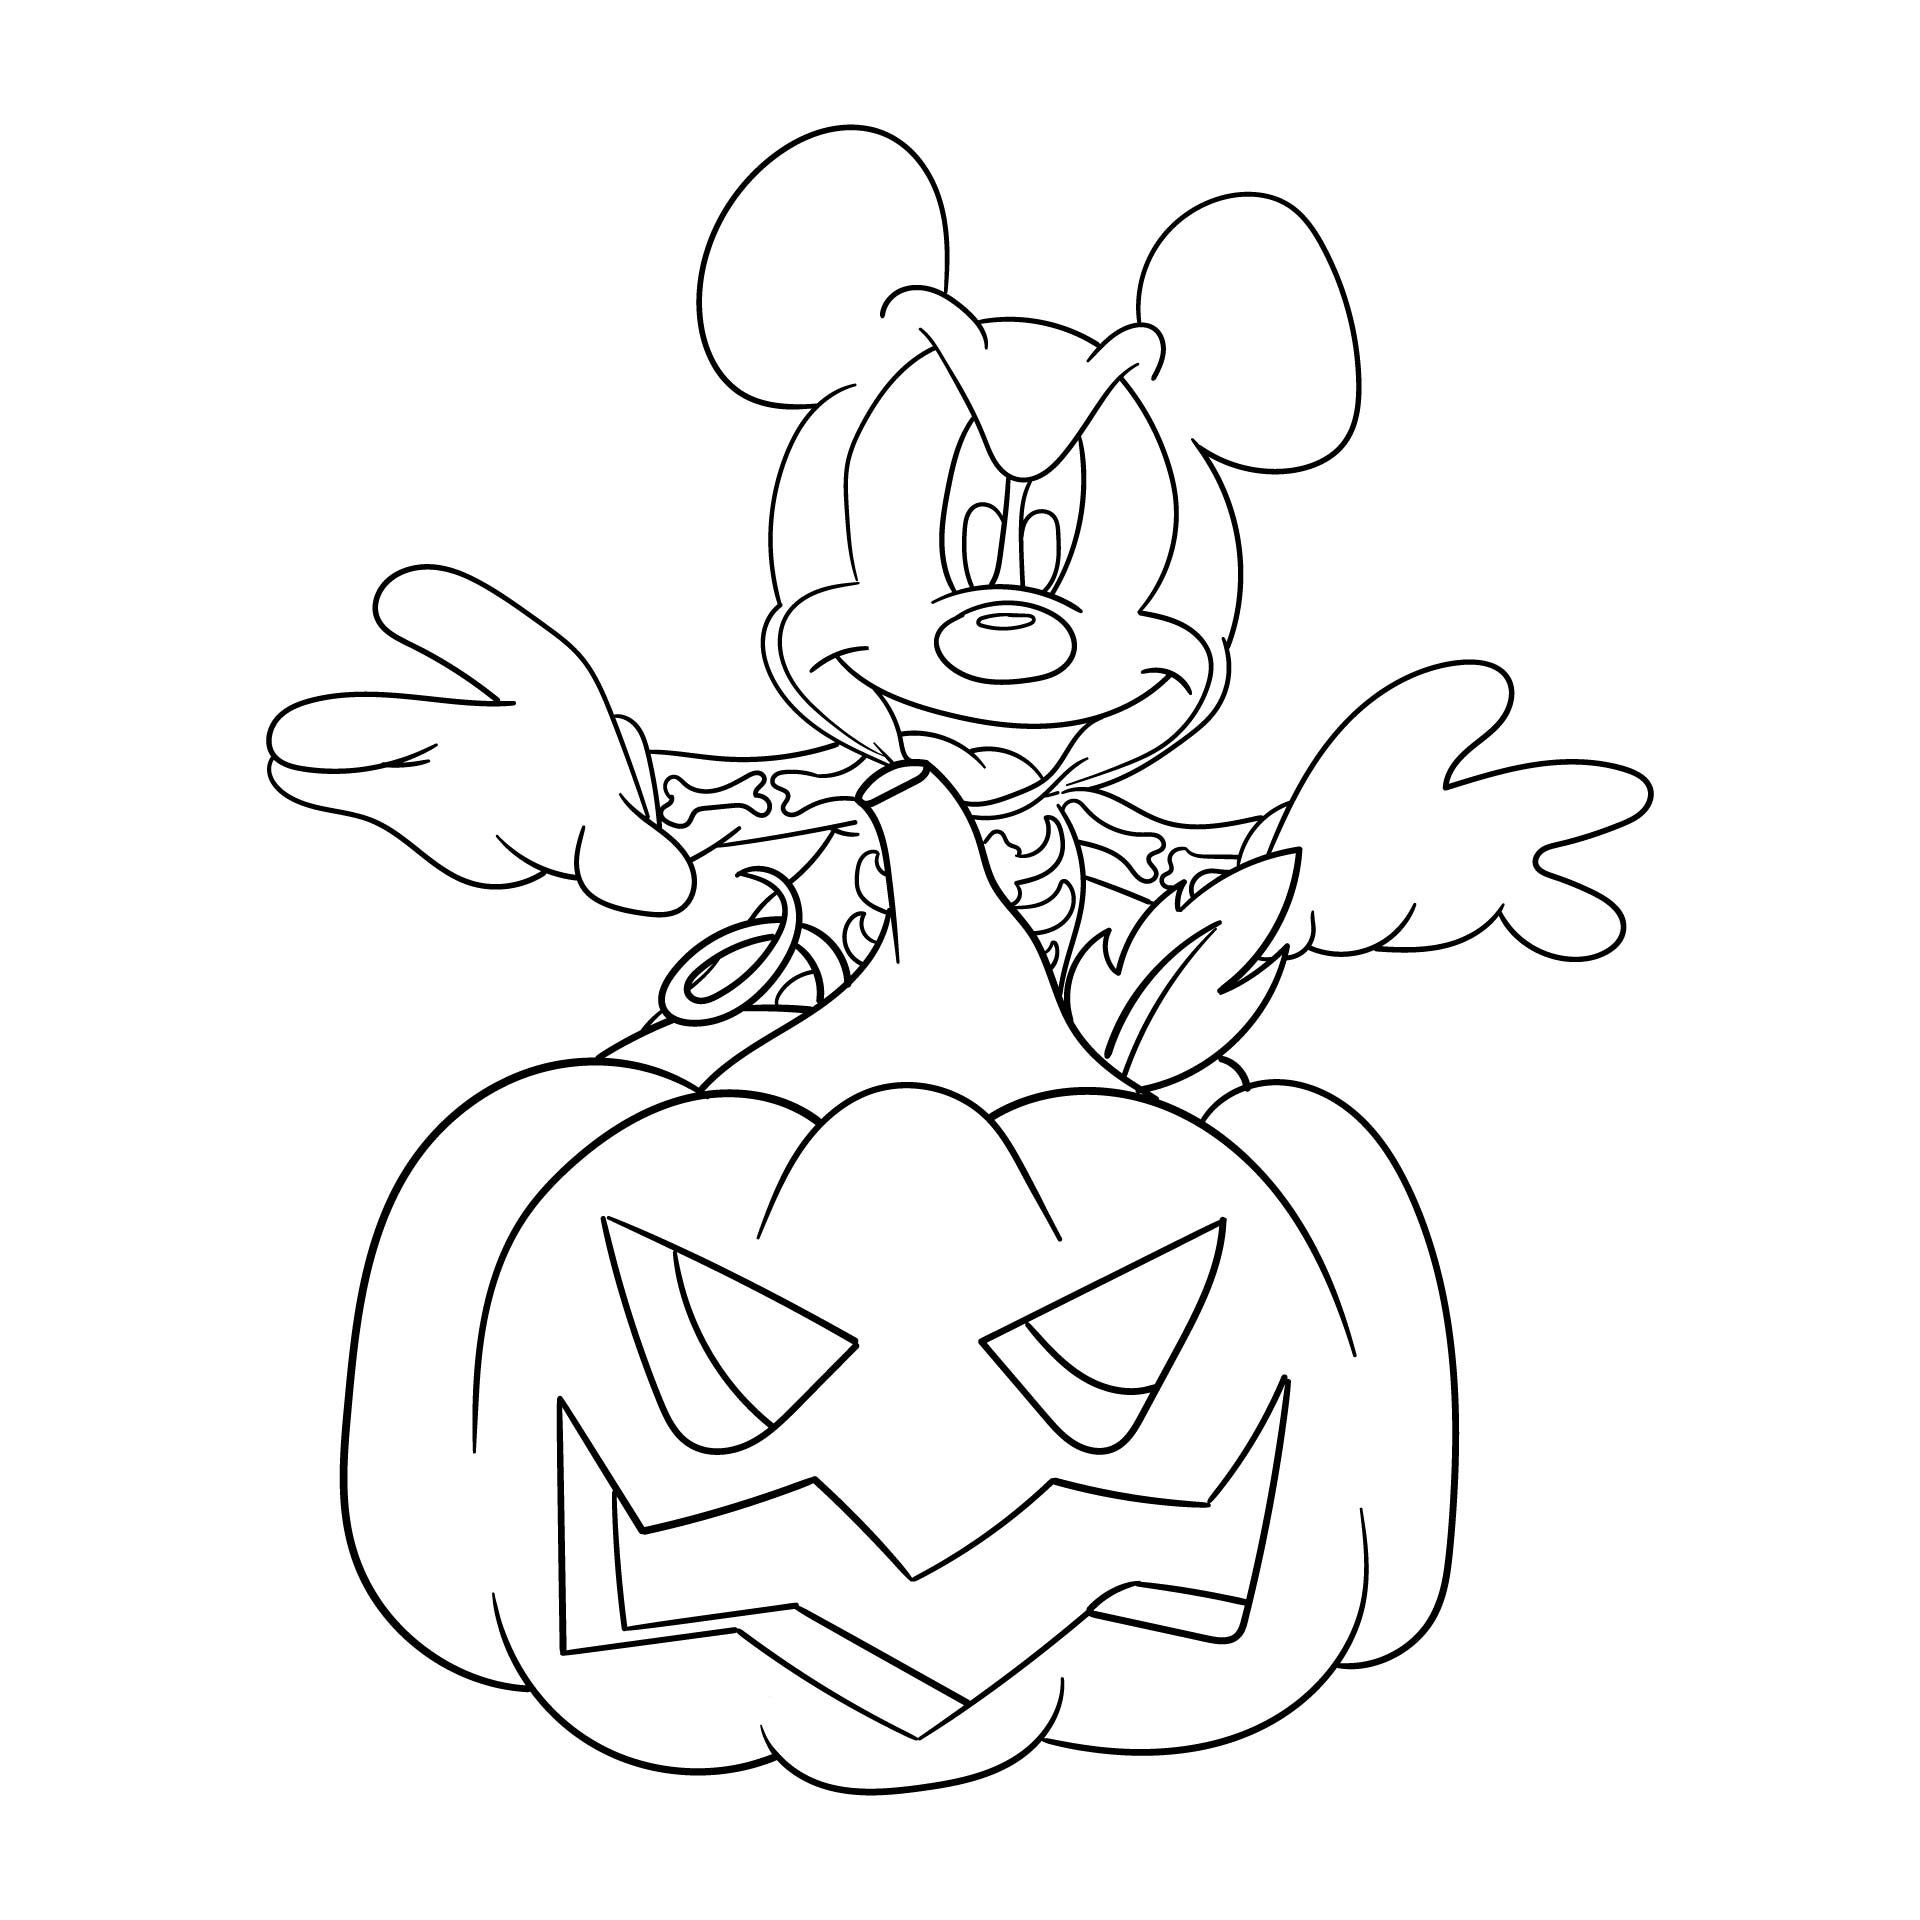 Mickey Mouse Halloween Coloring Pages